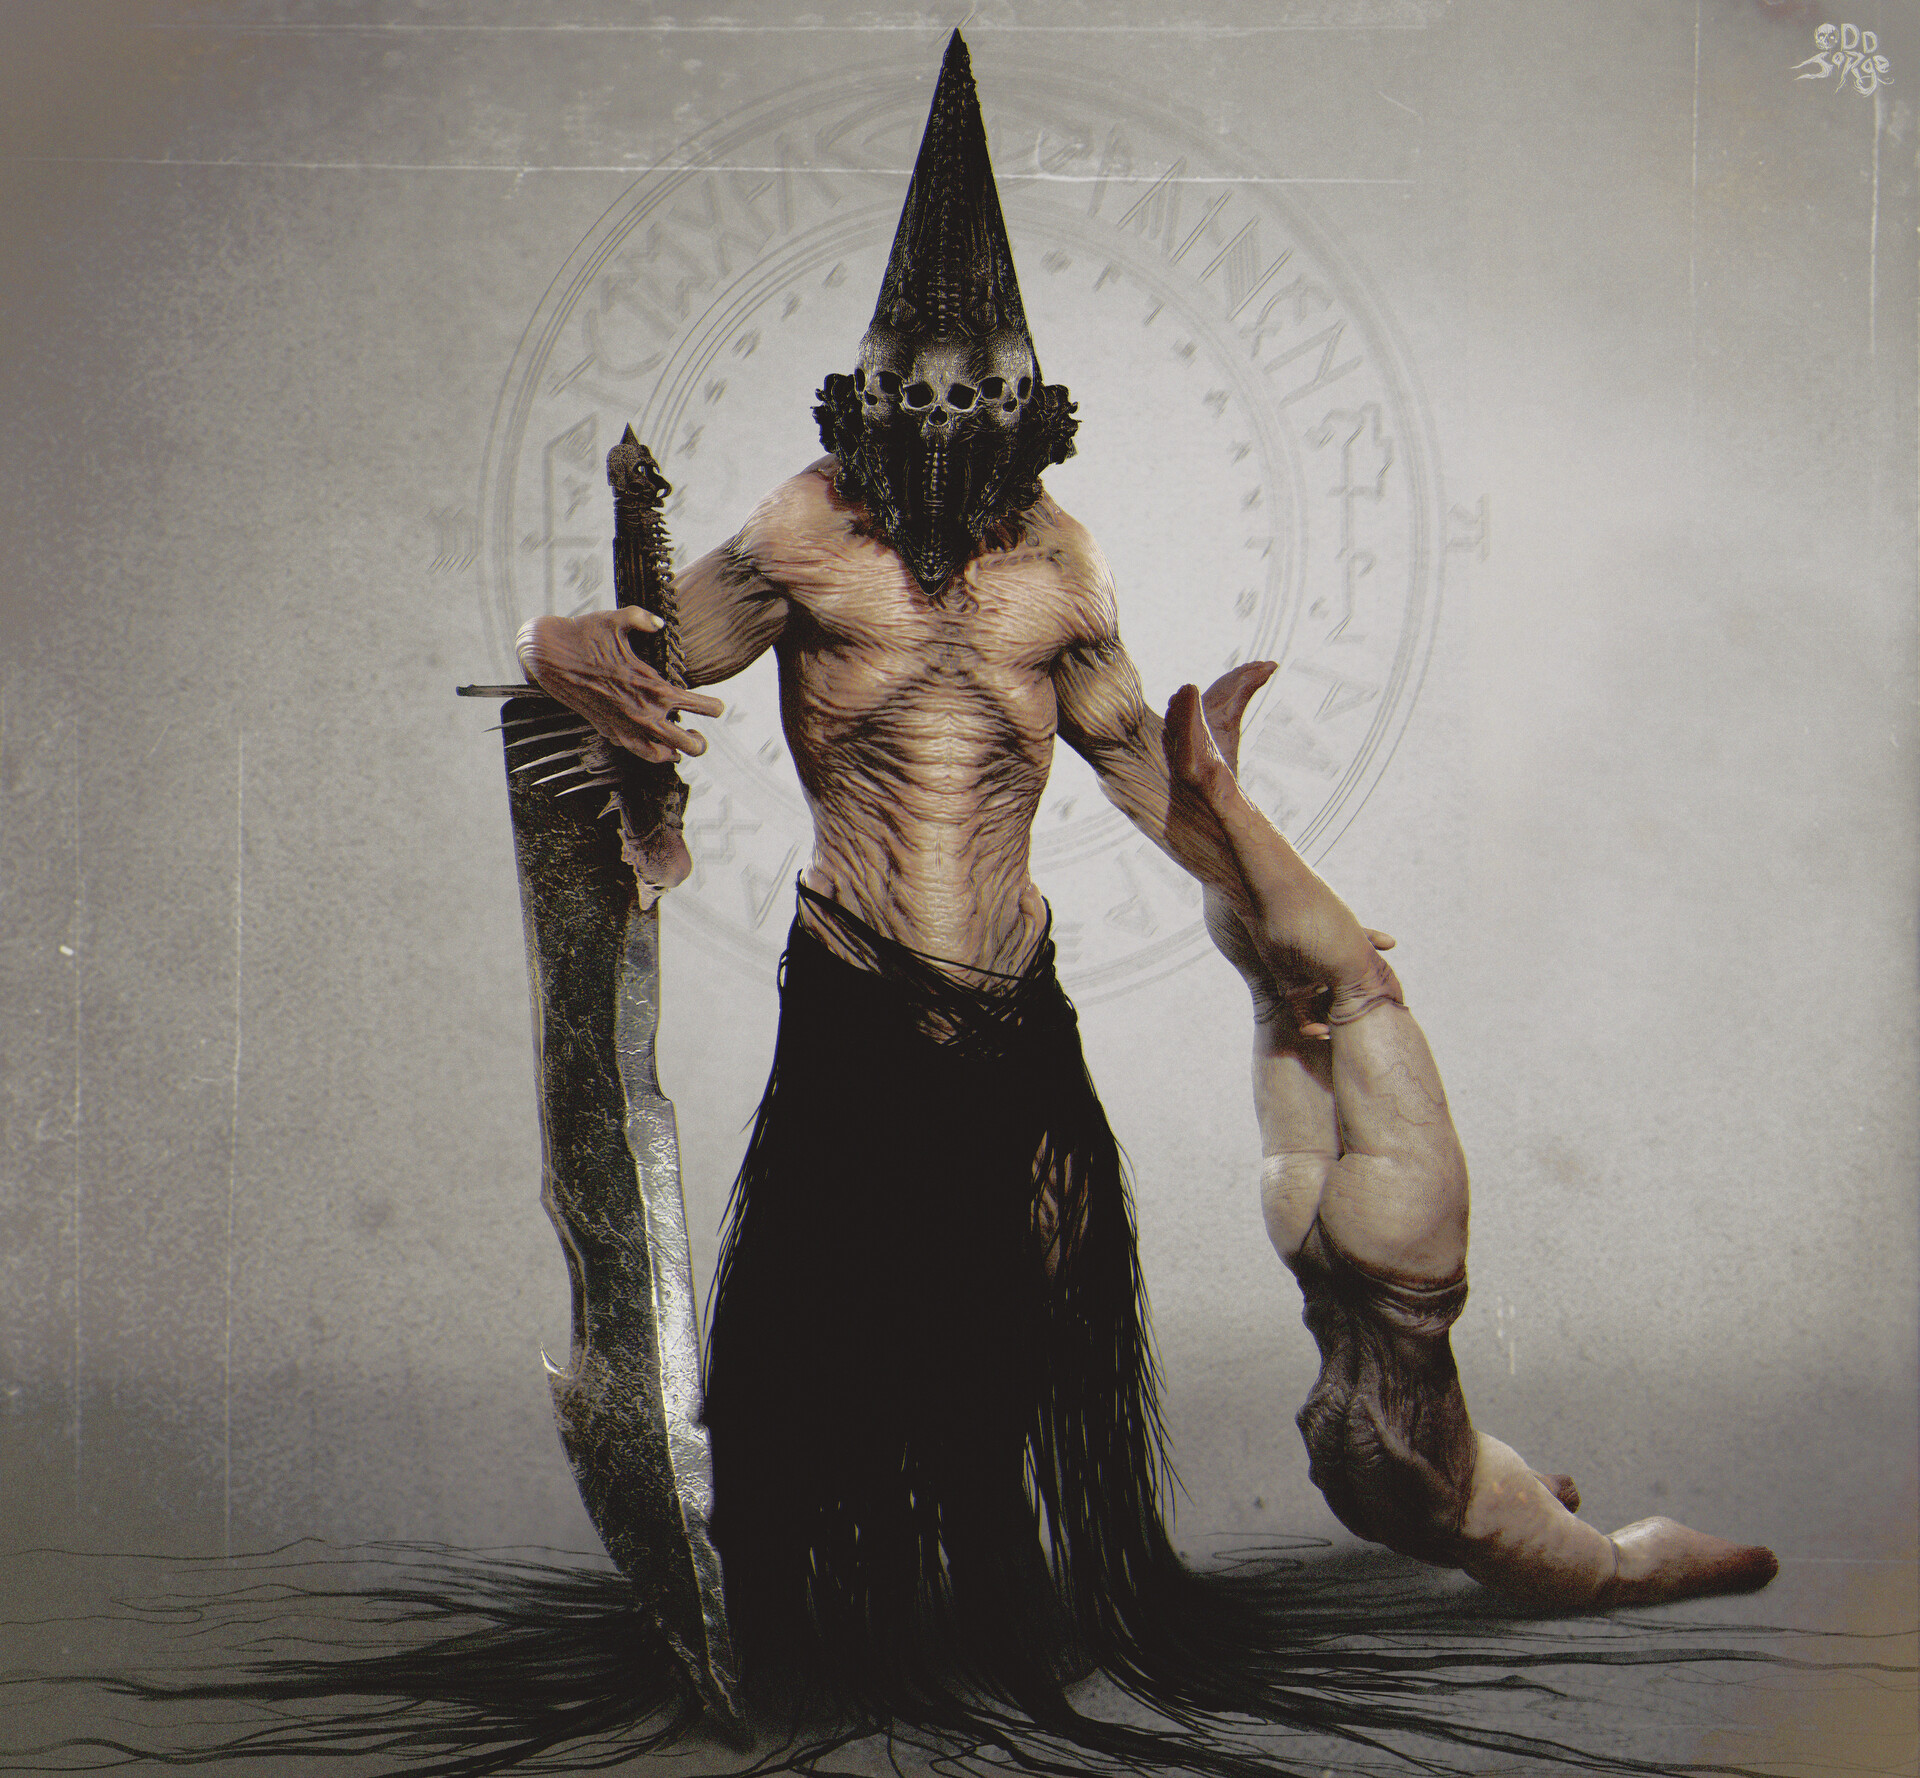 Silent Hill: How Pyramid Head Became a Horror Icon